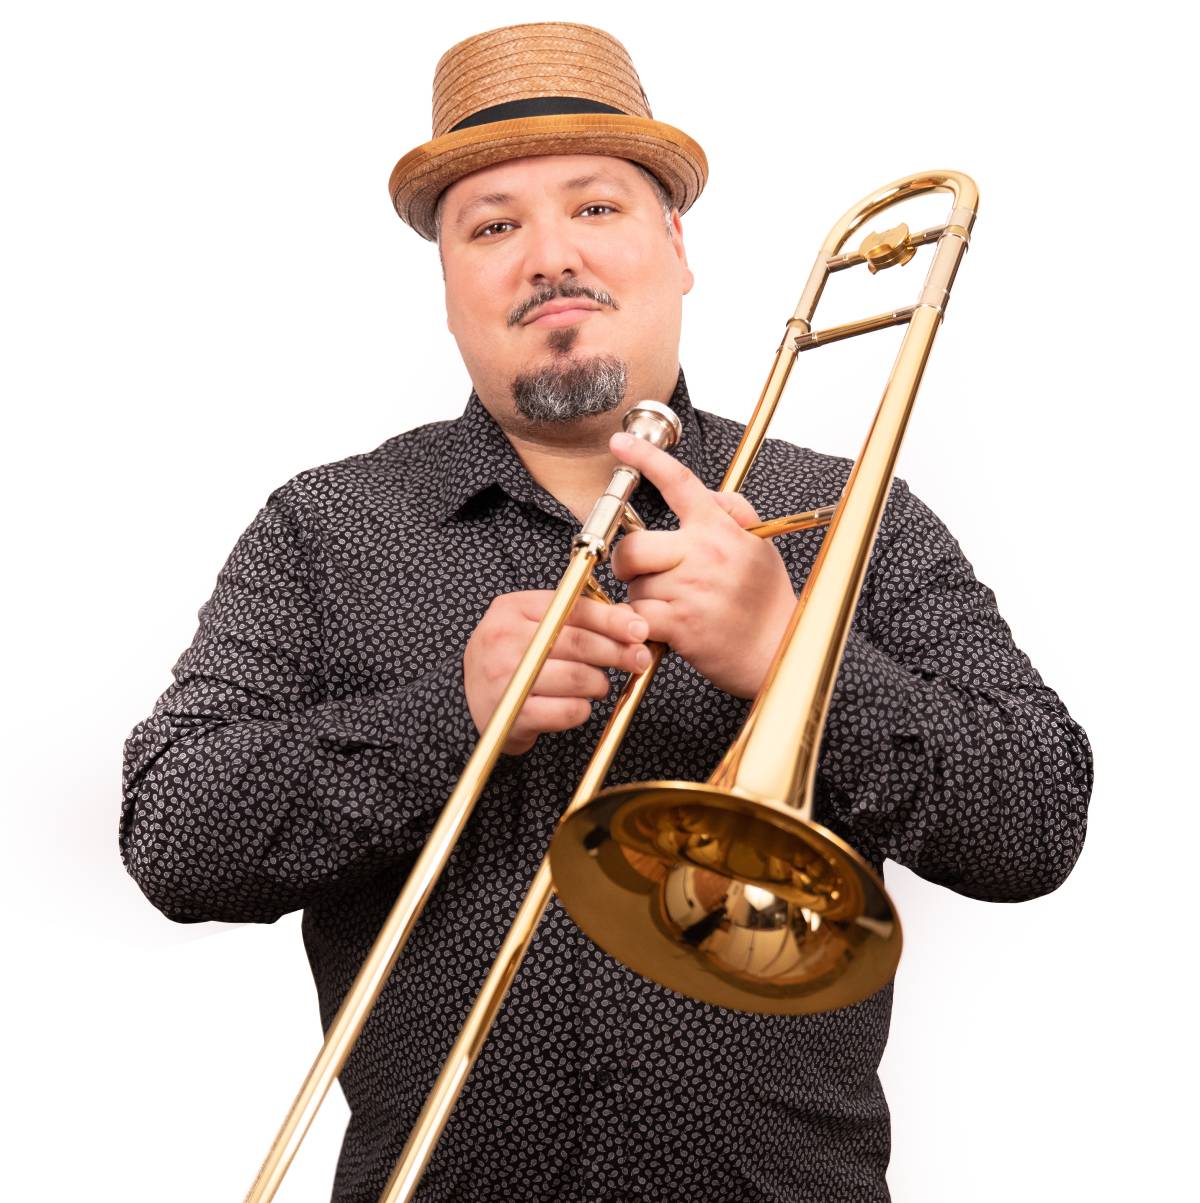 Michael Dease poses with his trombone